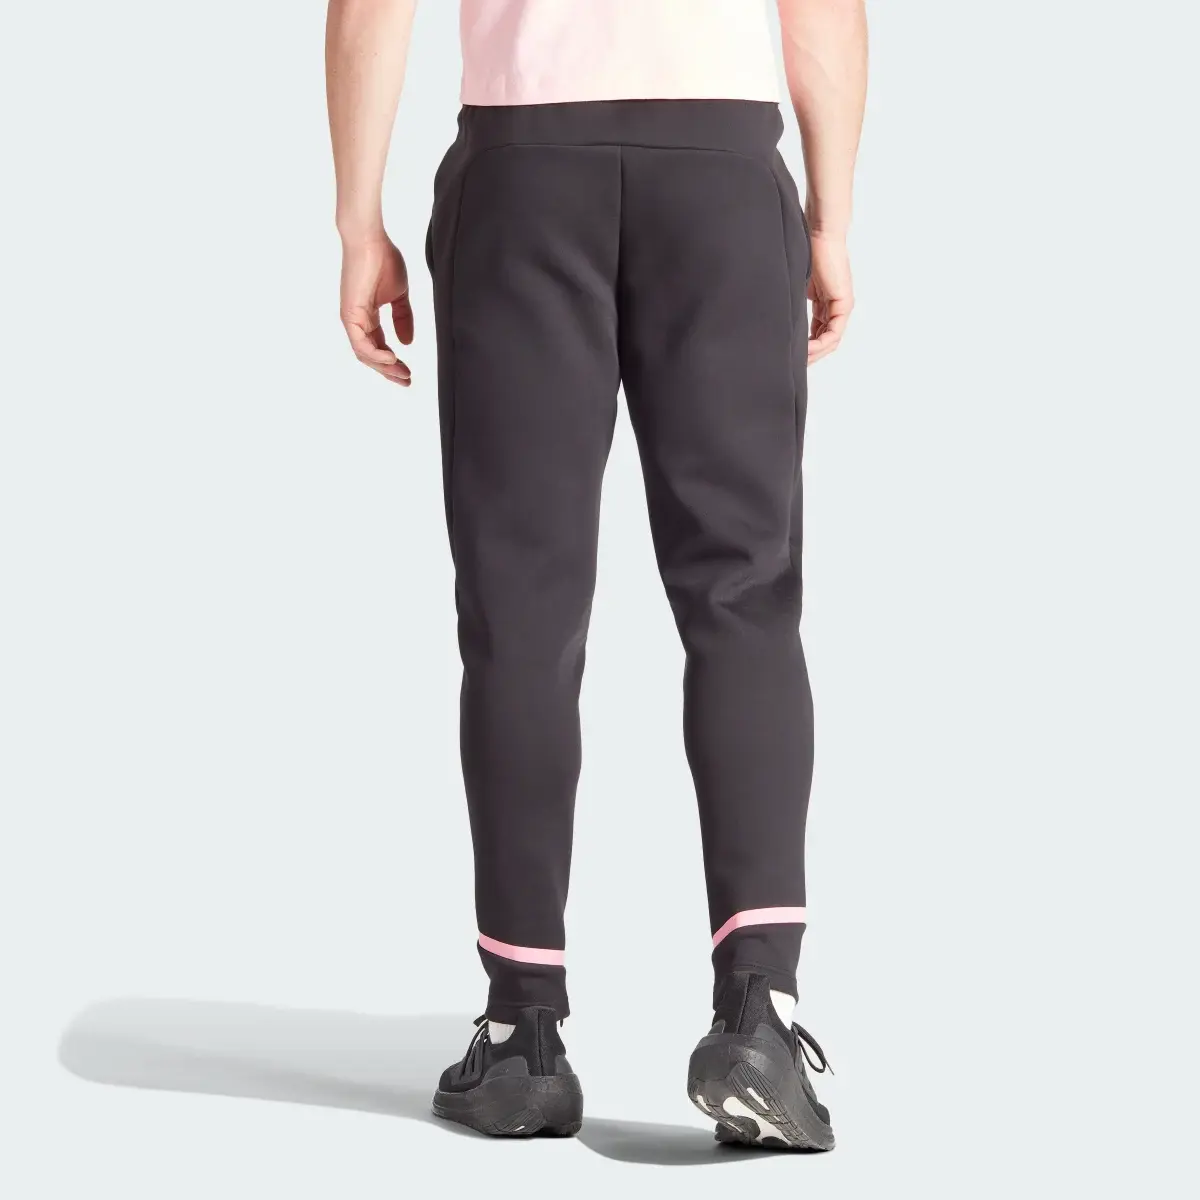 Adidas Inter Miami CF Designed for Gameday Travel Tracksuit Bottoms. 3